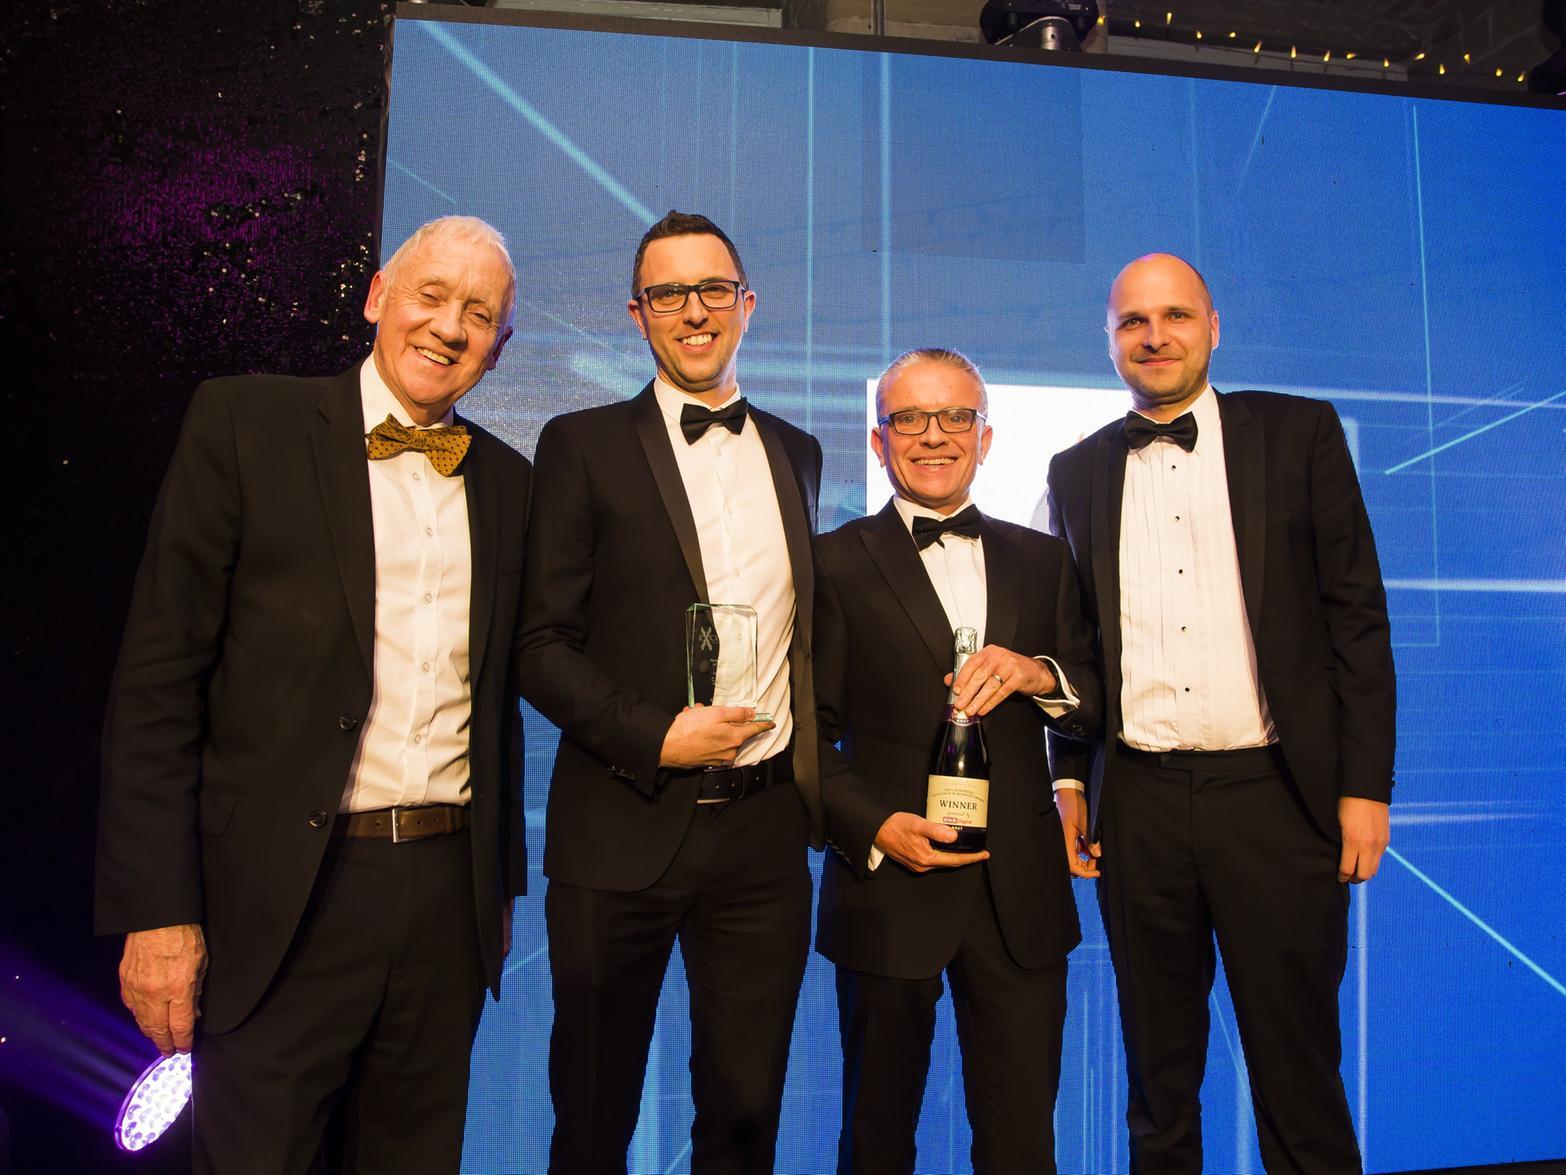 New Business of the Year - Candle Digital. From the left, host Harry Gration, Andy Jack from Candle Digital, Sponsor Robin Tuddenham from Calderdale Council and Mark Langdale from Candle Digital.